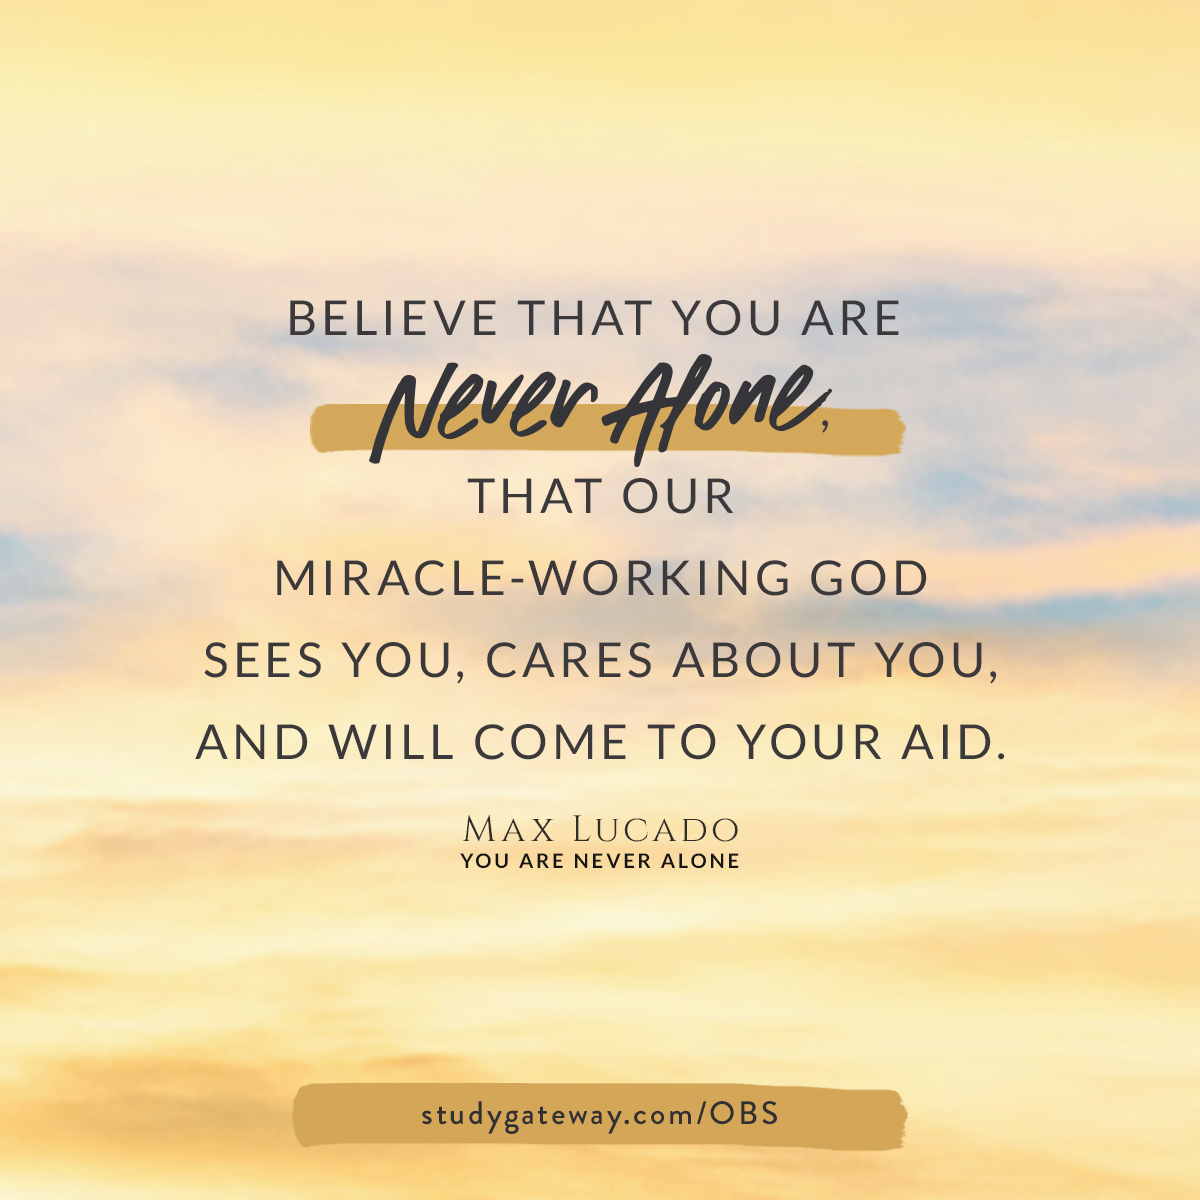 You Are Never Alone Week 6 — God Is with You When You Need Grace